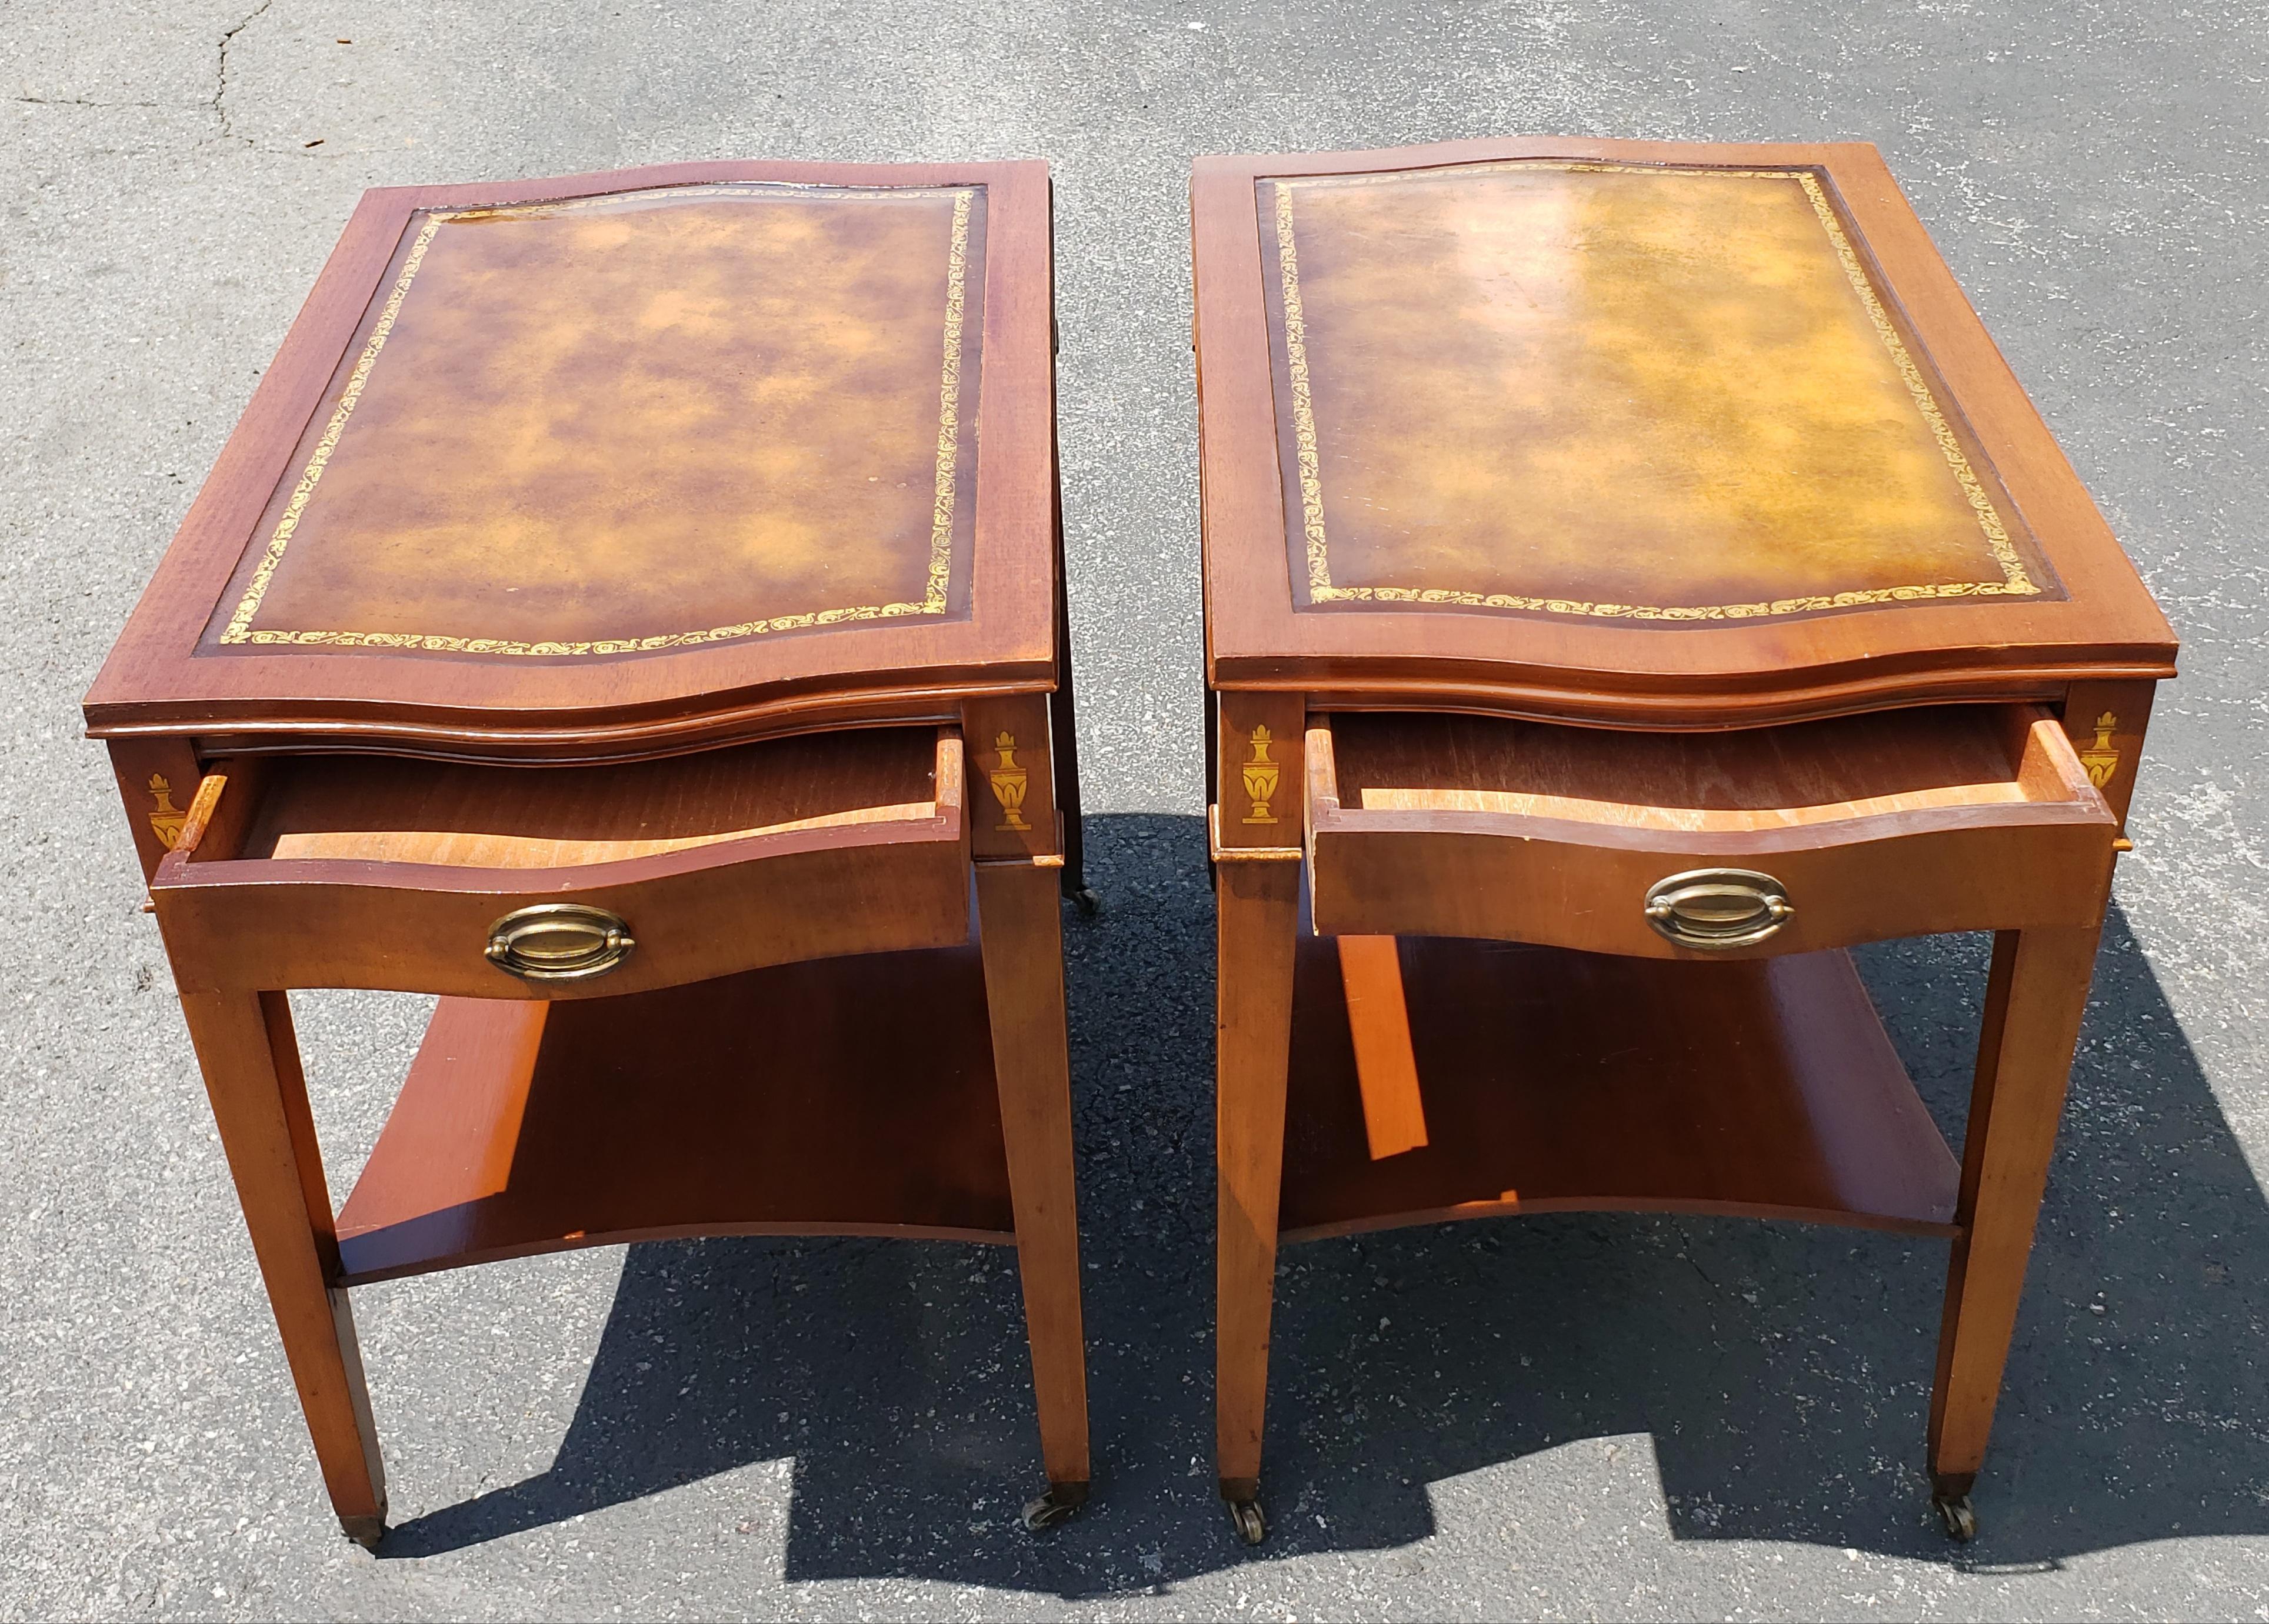 A well kept pair of 1958 Hollywood Regency Mahogany with inlays  and Tooled Leather Top and Gilt Stencil Two tier side Tables on original wheels. Very good vintage condition. Mesure 17.75